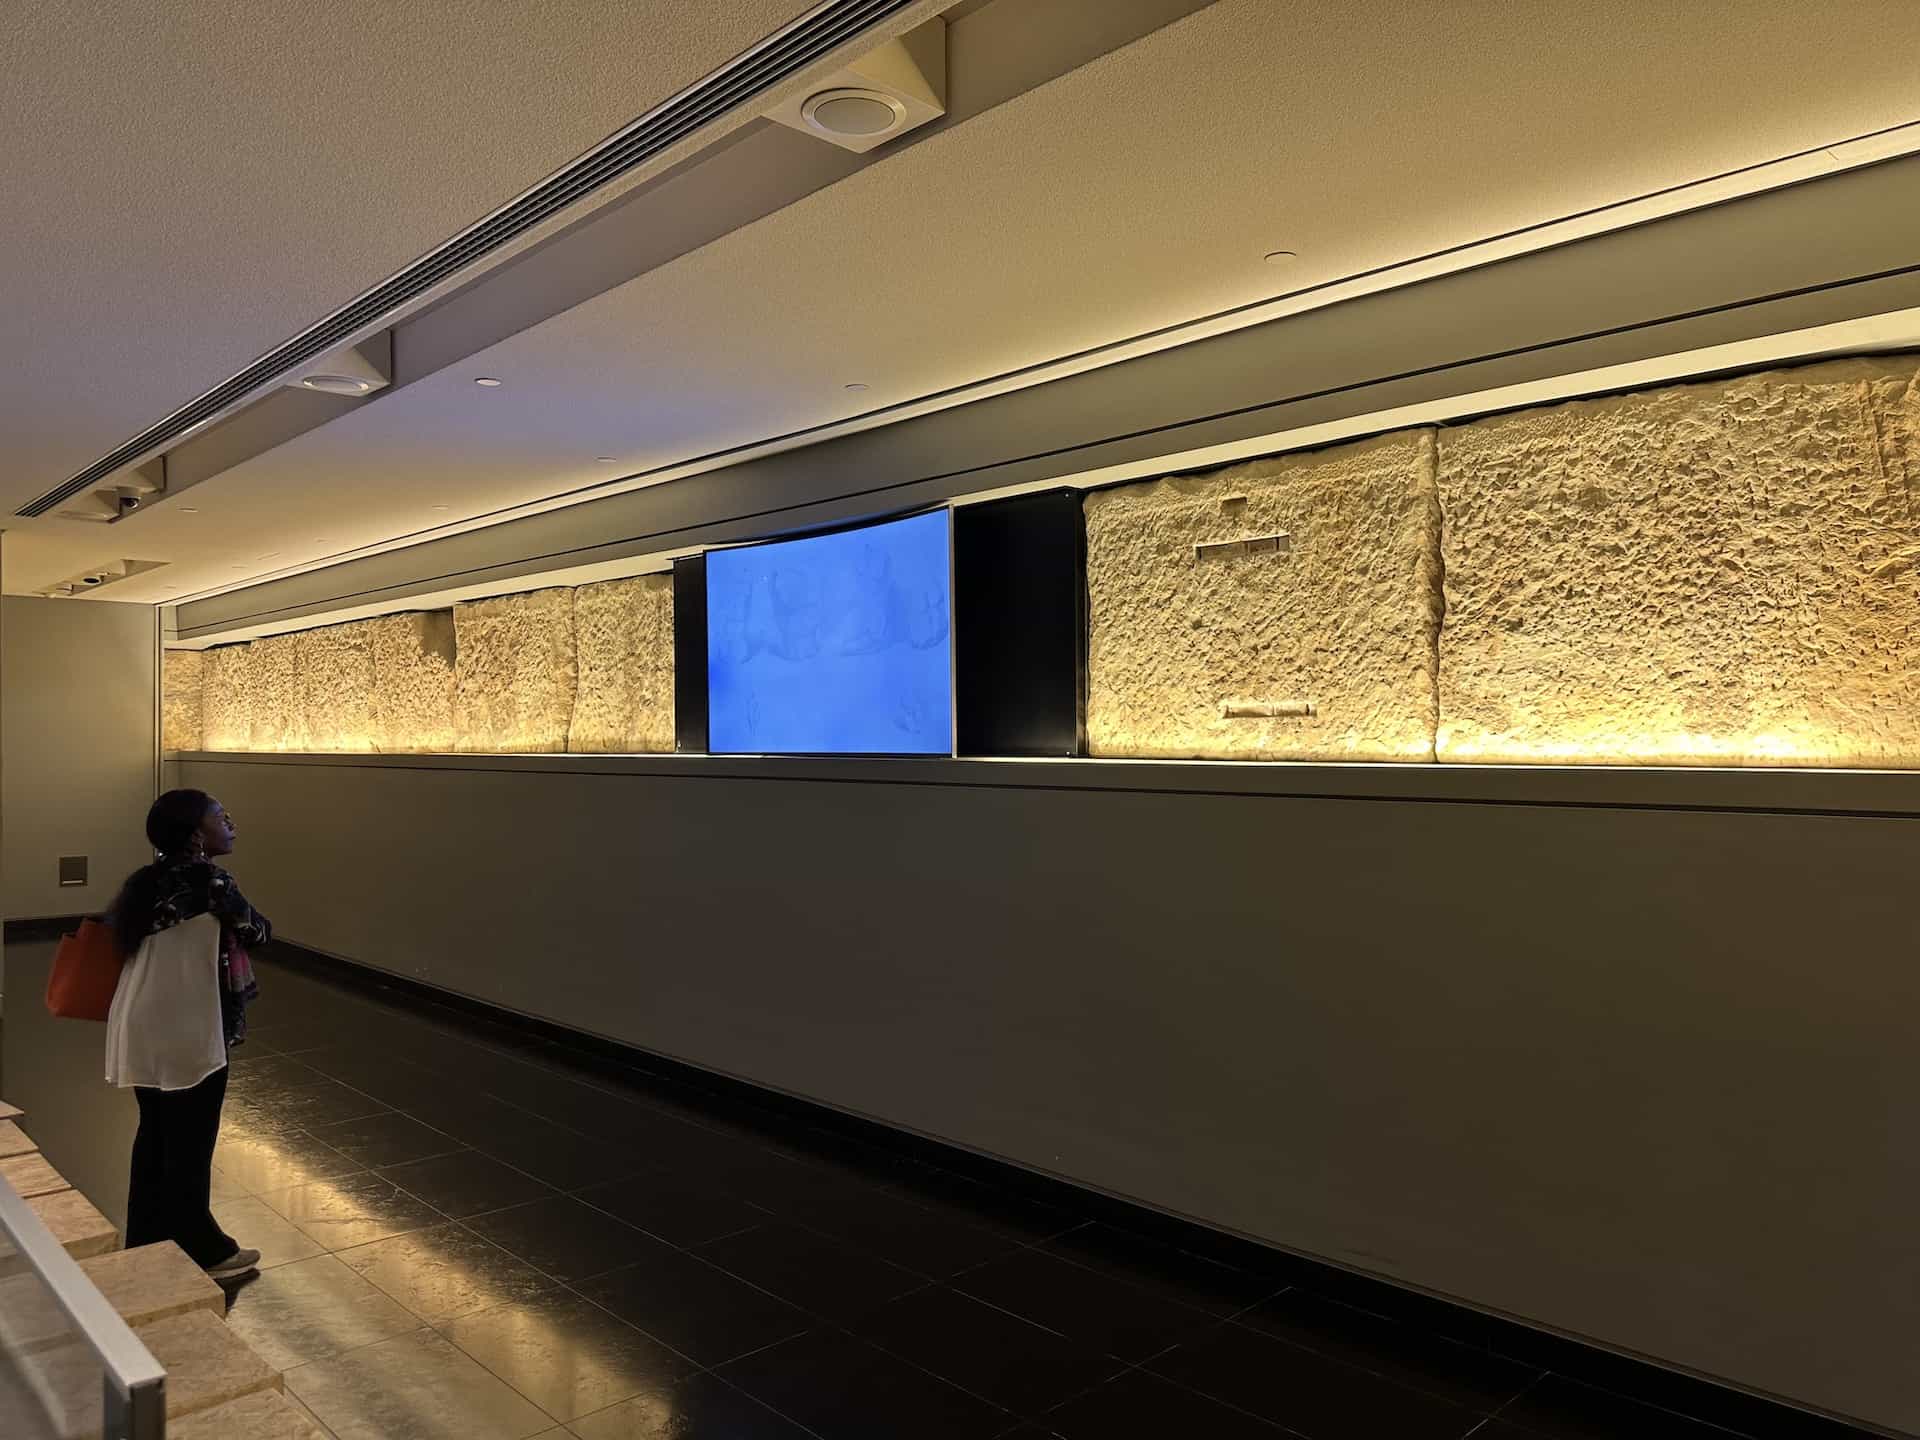 Behind the west frieze of the Parthenon at the Acropolis Museum in Athens, Greece